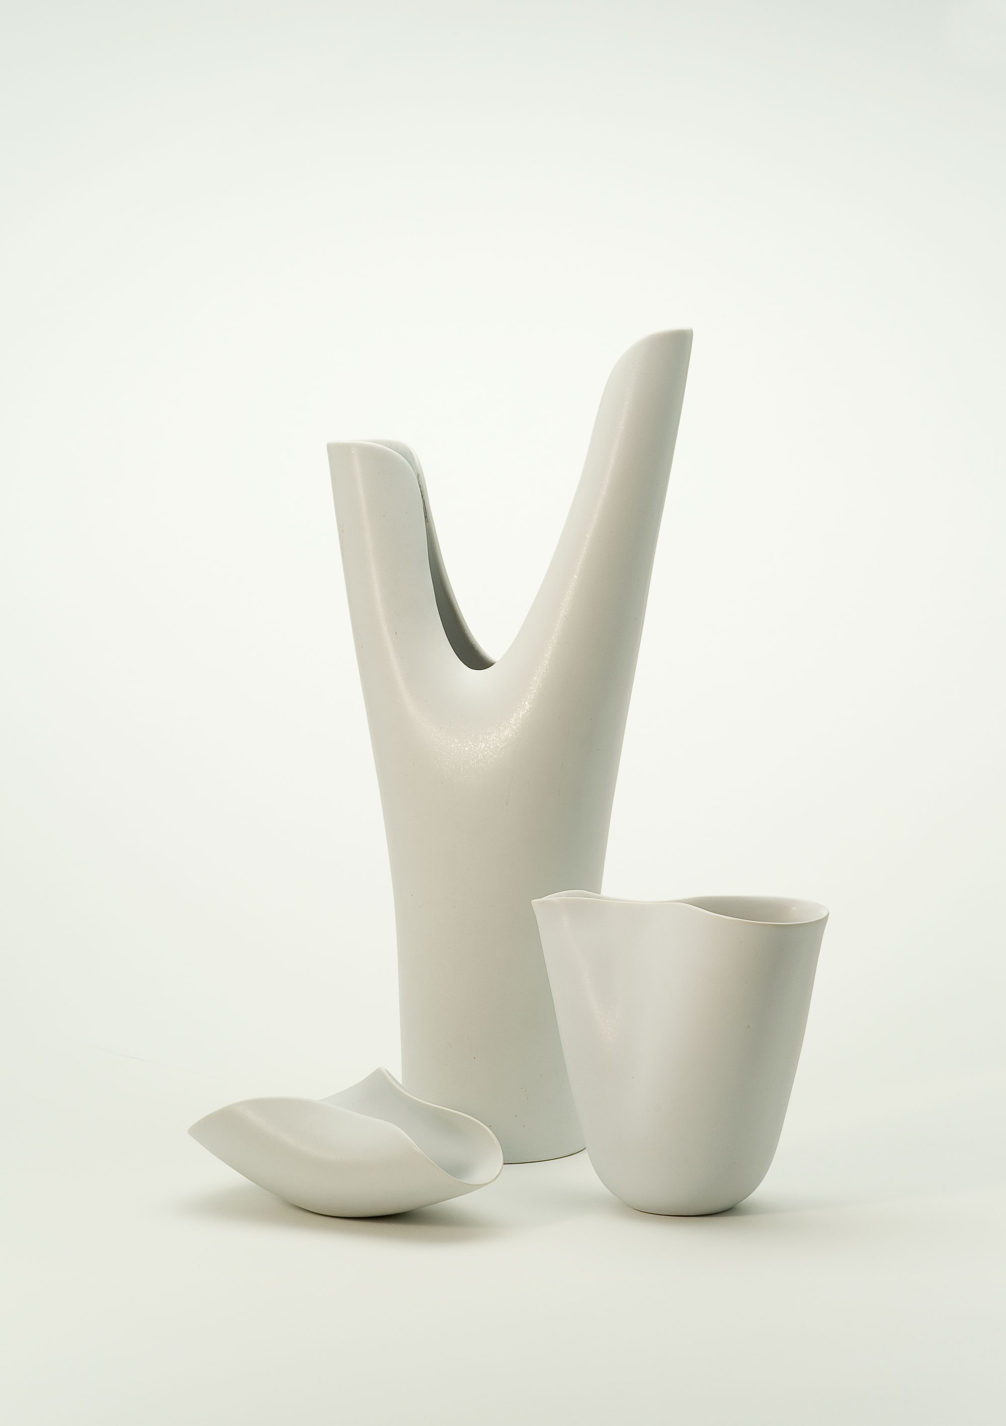 Two vases of different shapes and sizes and one bowl in off-white porcelain.